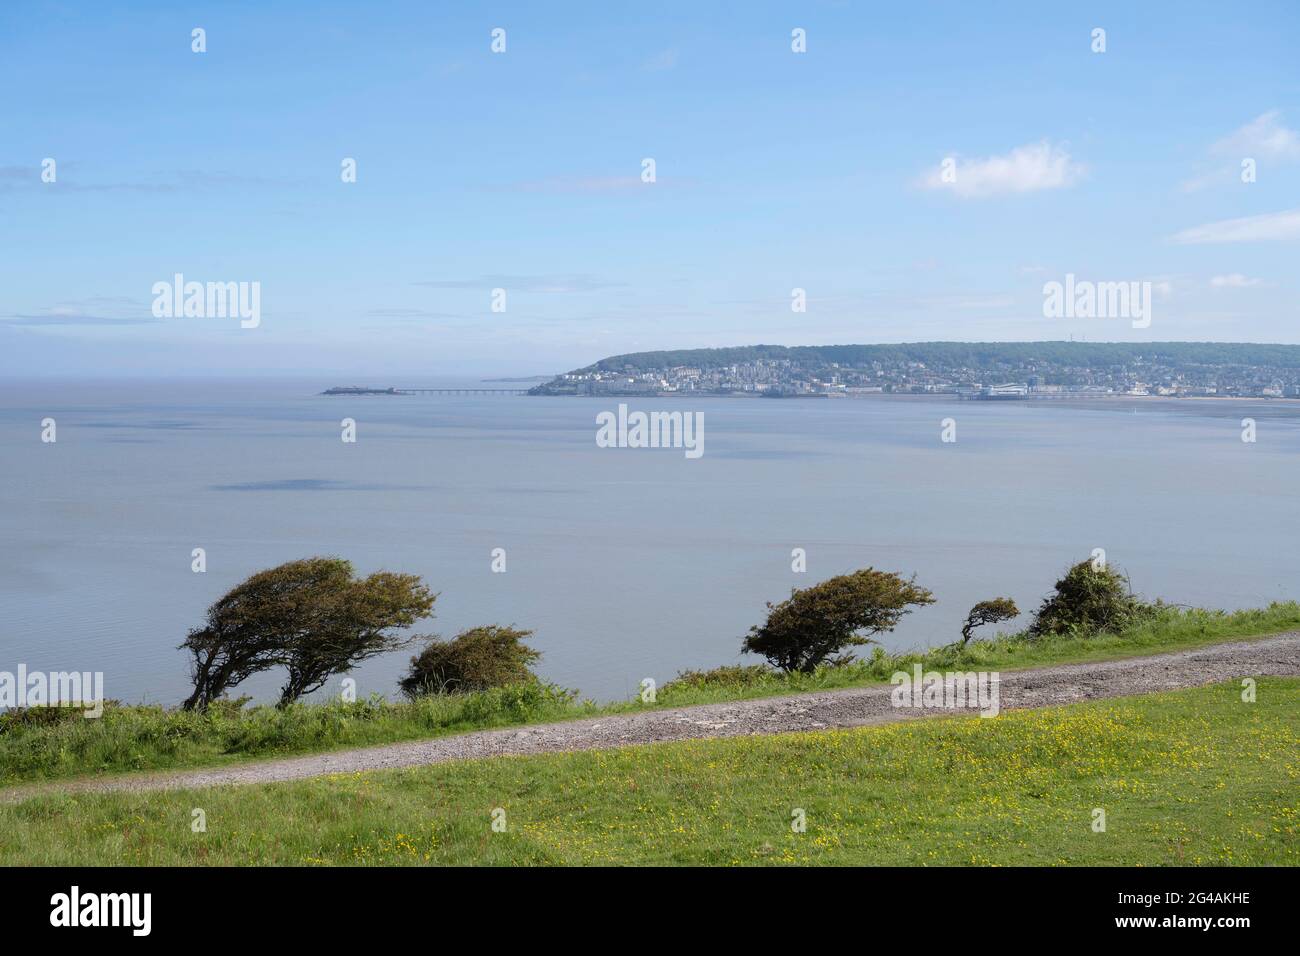 View towards Weston-super-Mare from Brean Down, North Somerset, England. Stock Photo